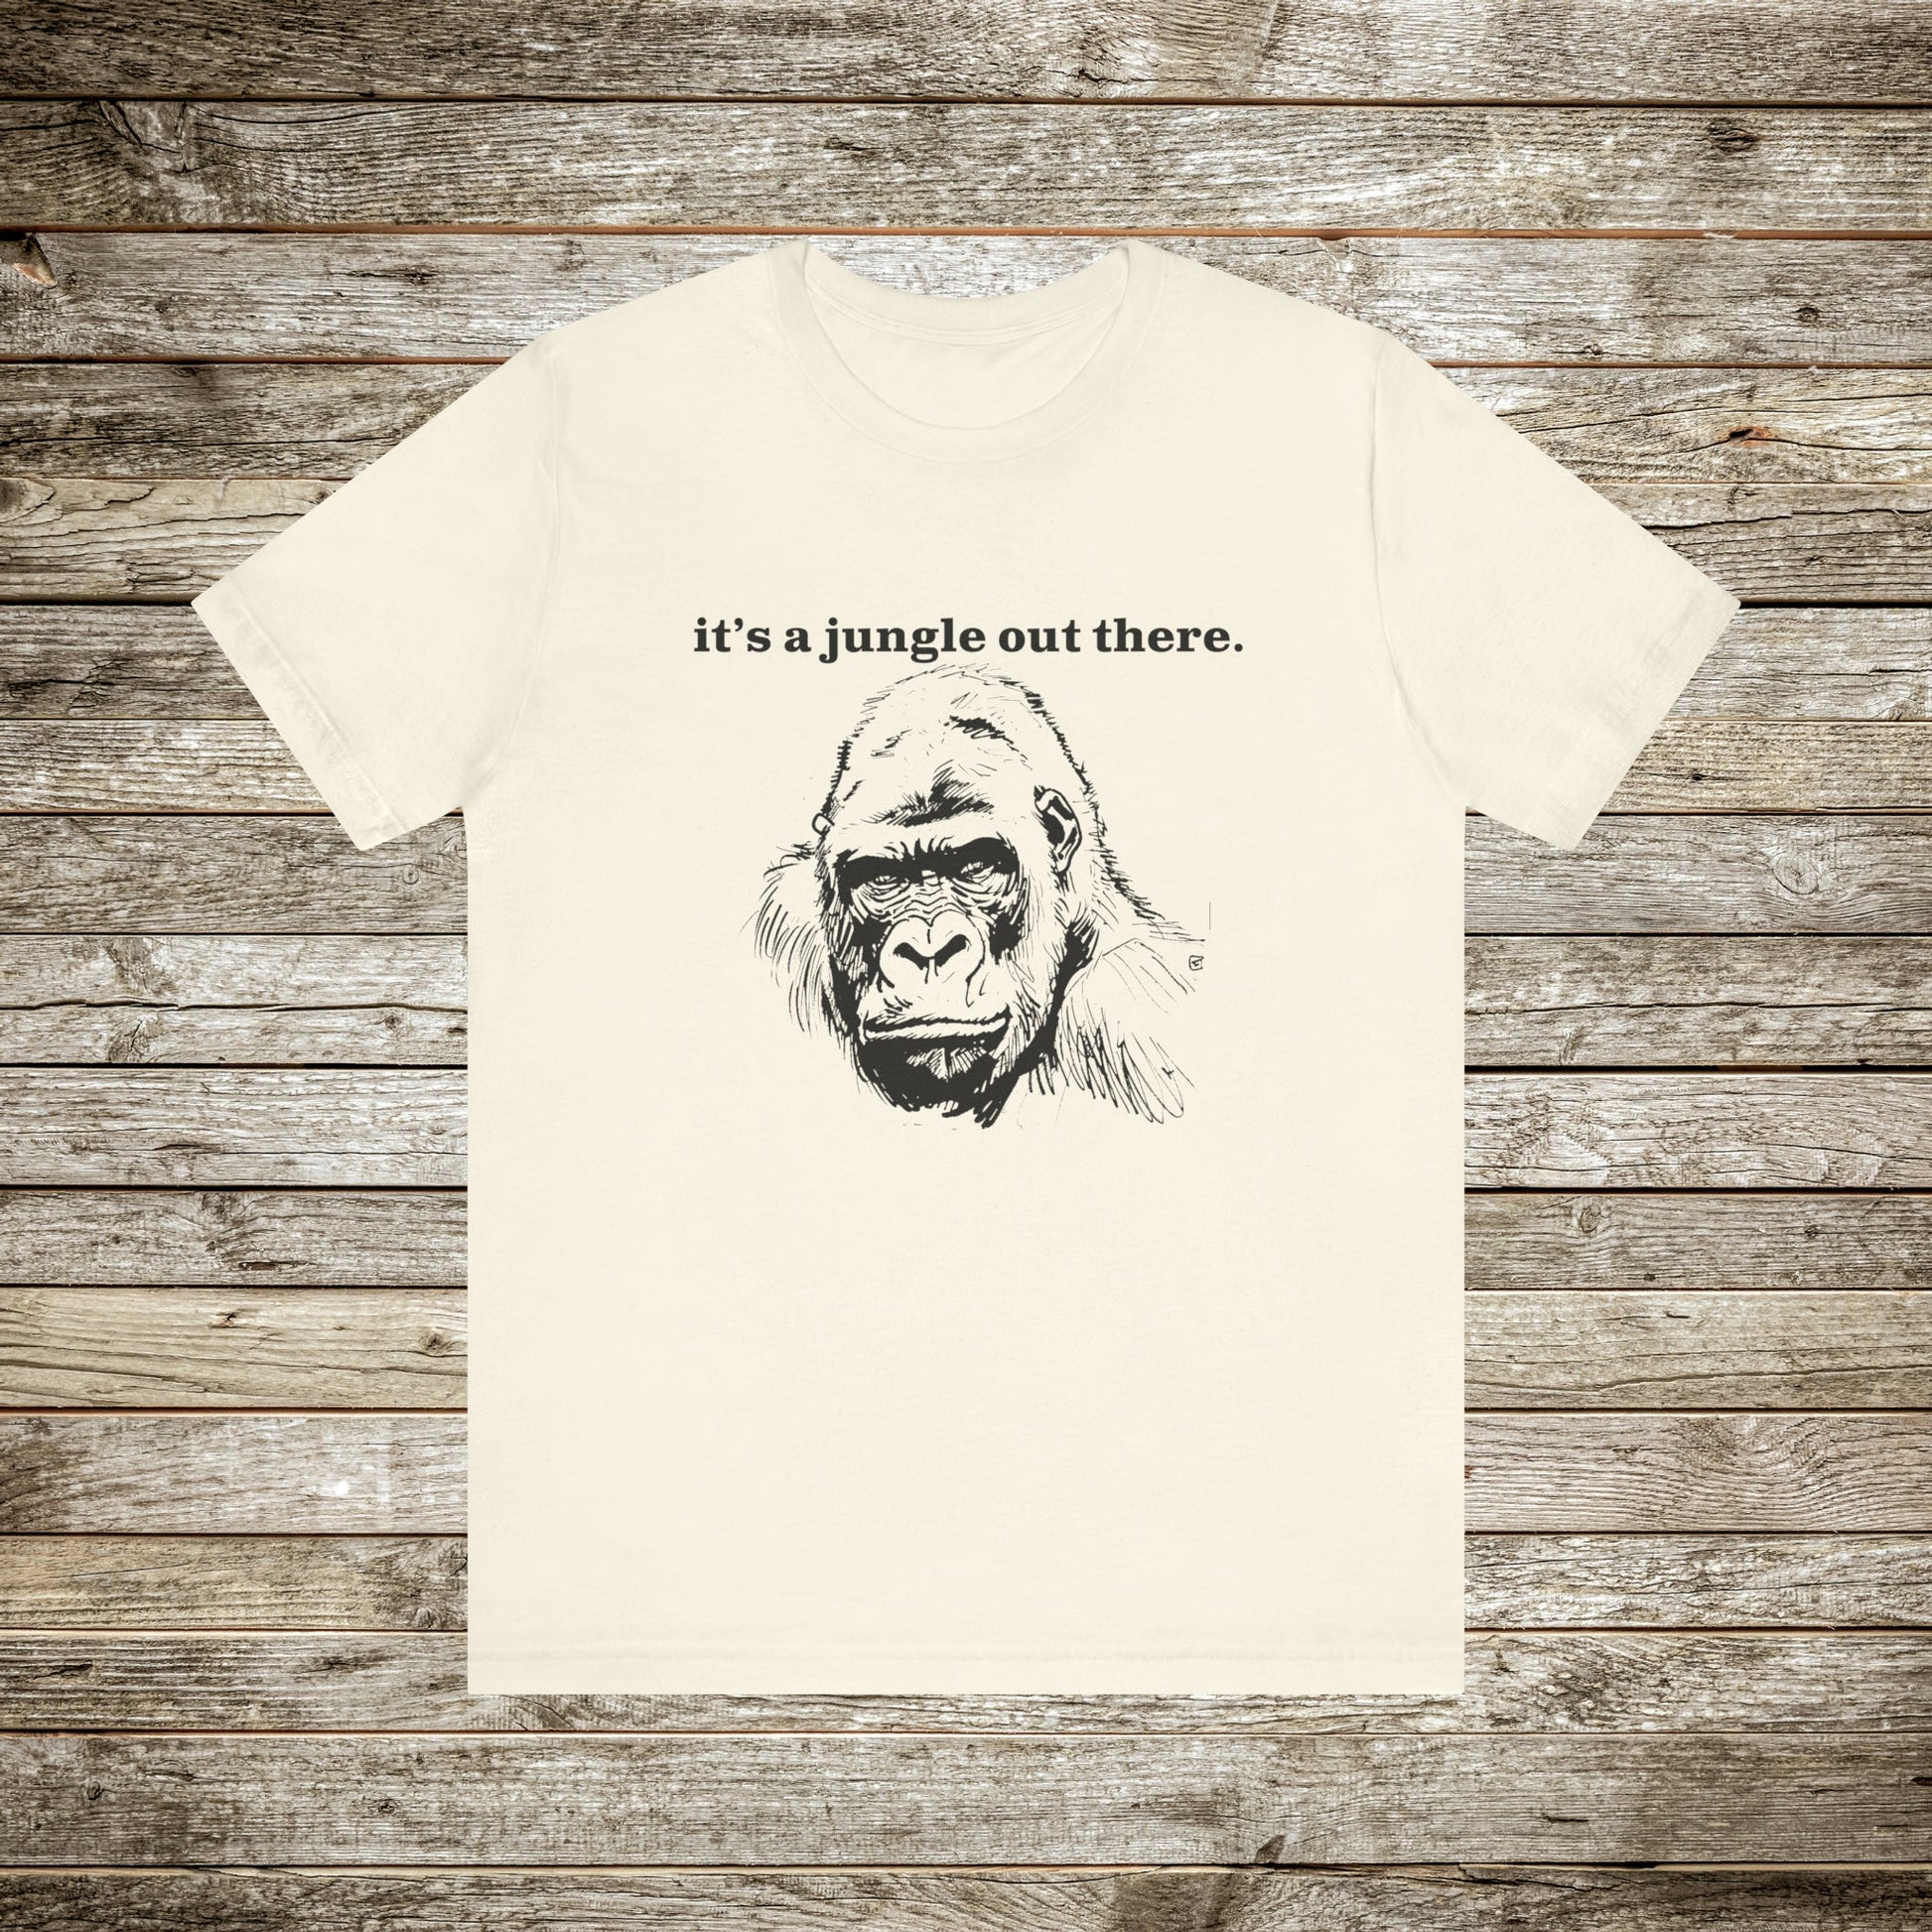 Gorilla T-shirt, Gorilla Drawing on a Tee, Wearable Gorilla Art, "Its a Jungle out there" - FlooredByArt